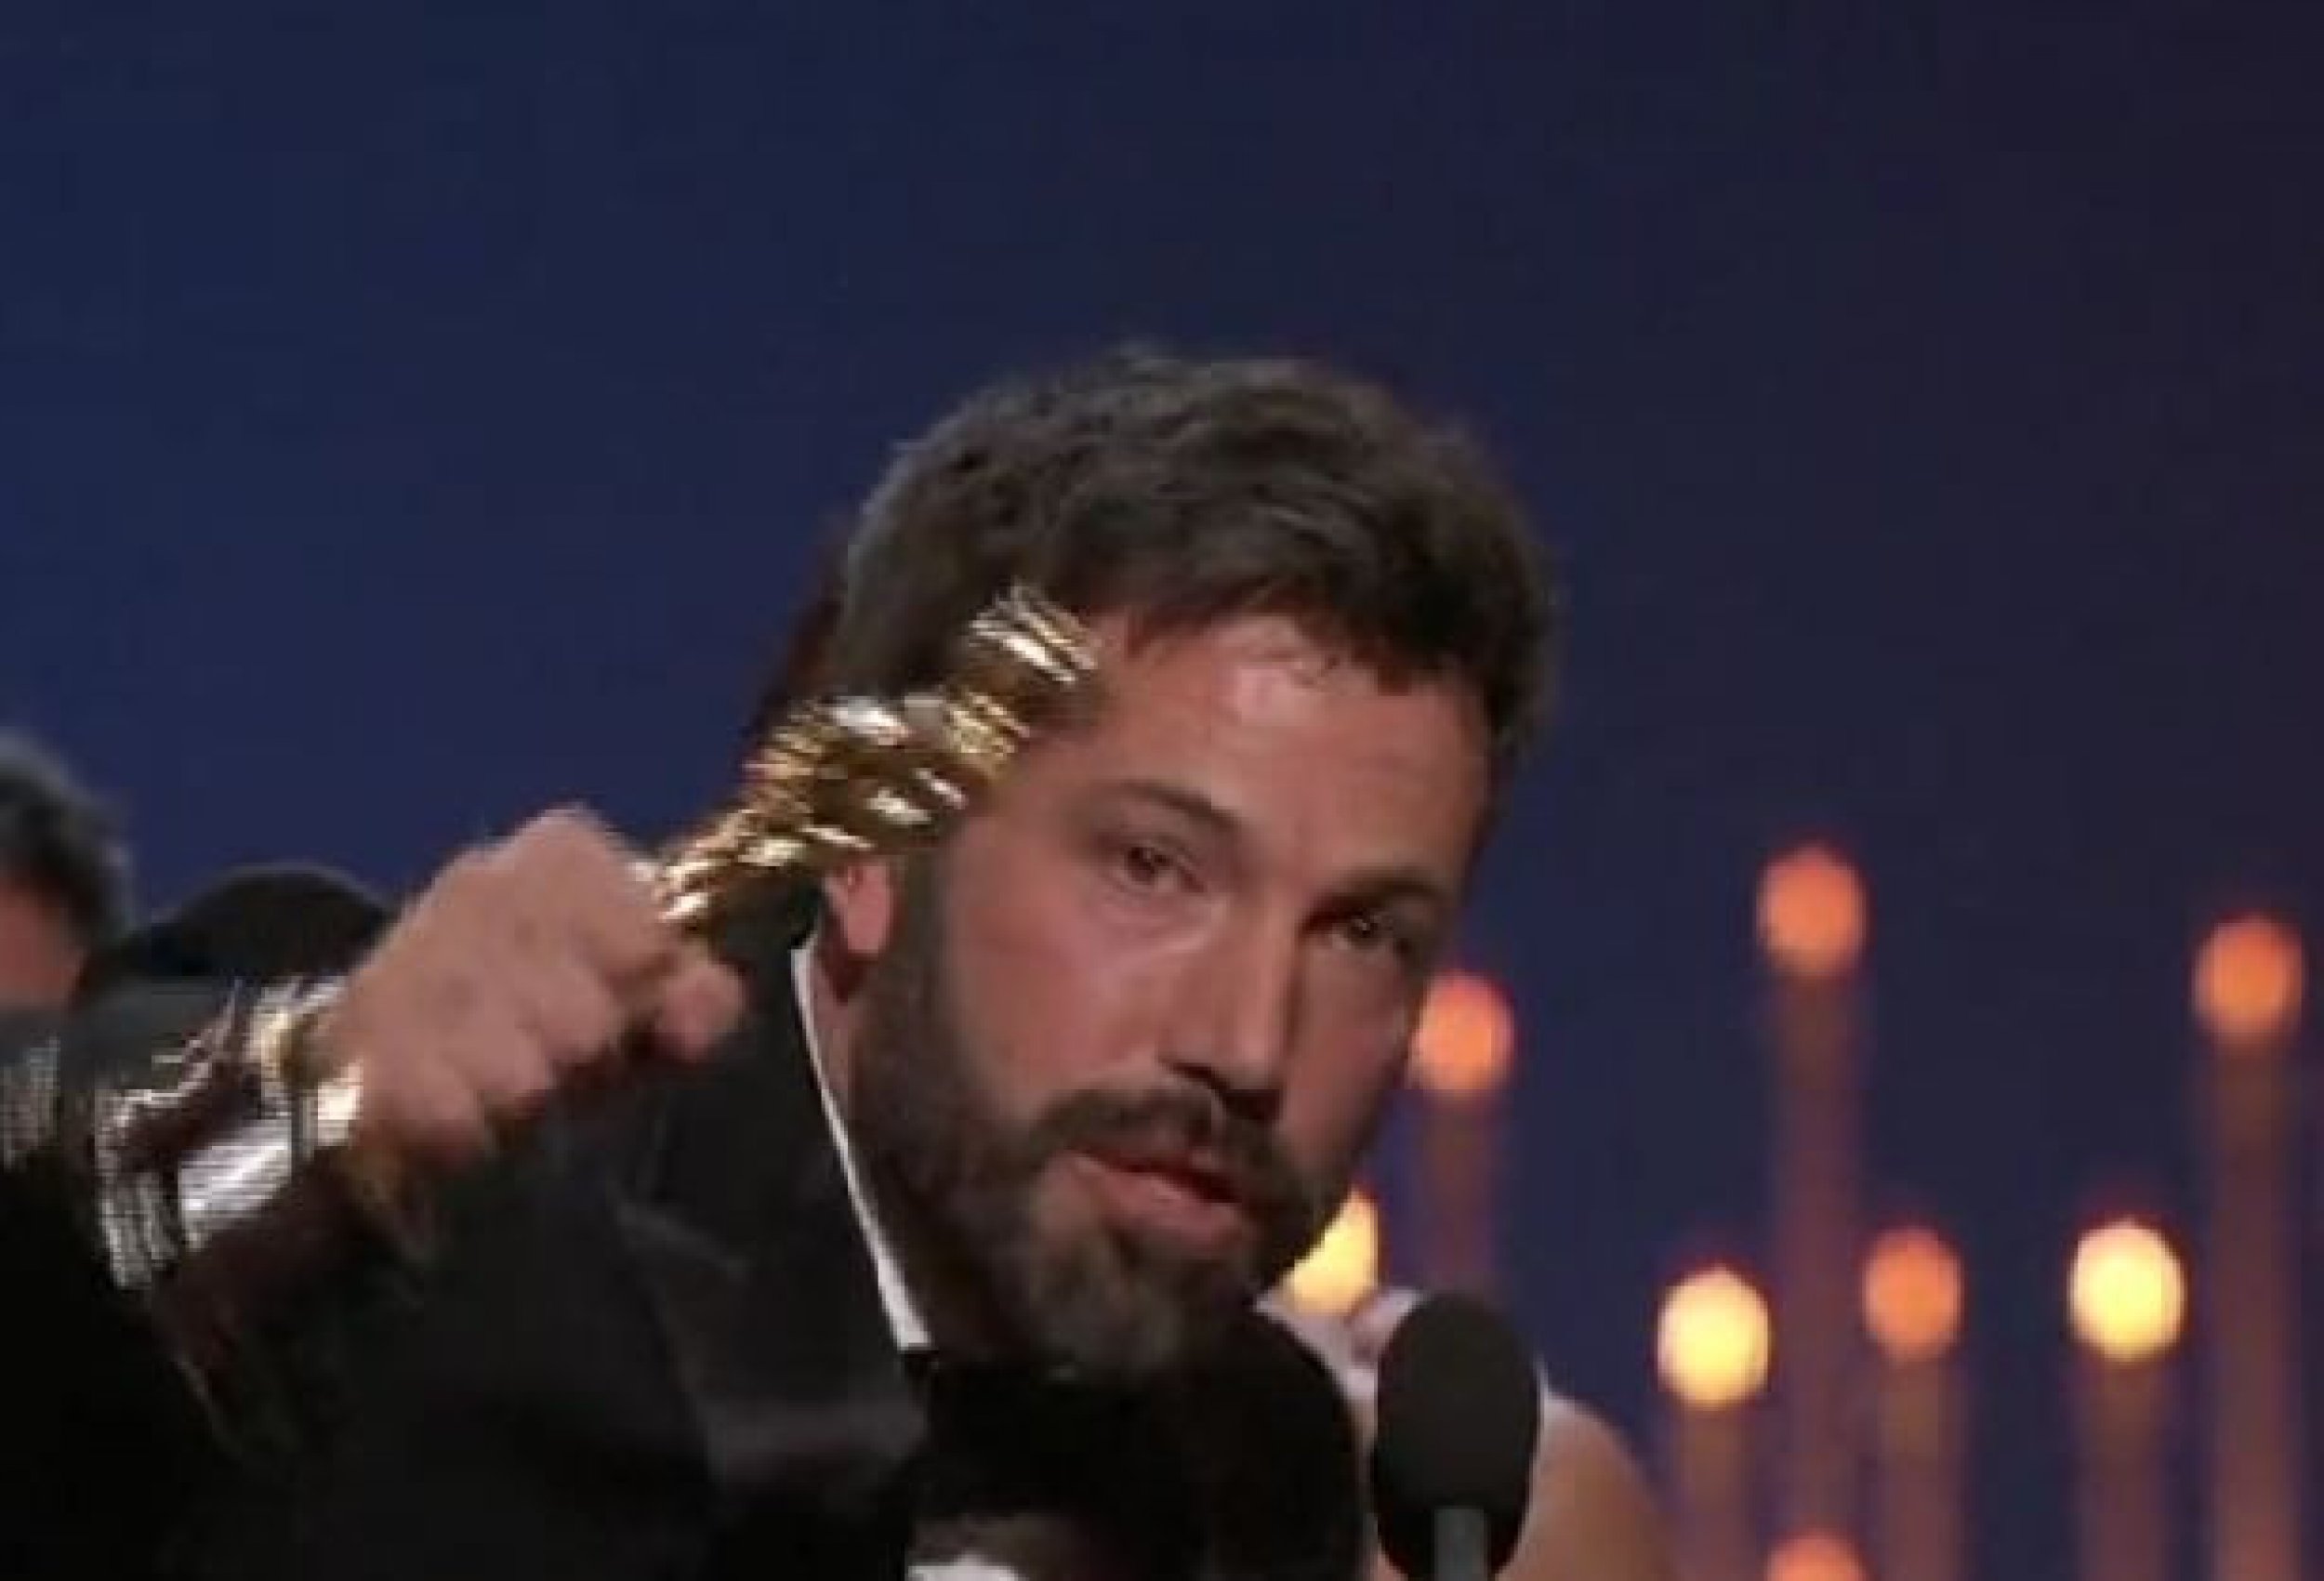 Affleck Has The Last Laugh After Director Snub, With Argo Winning Best Picture